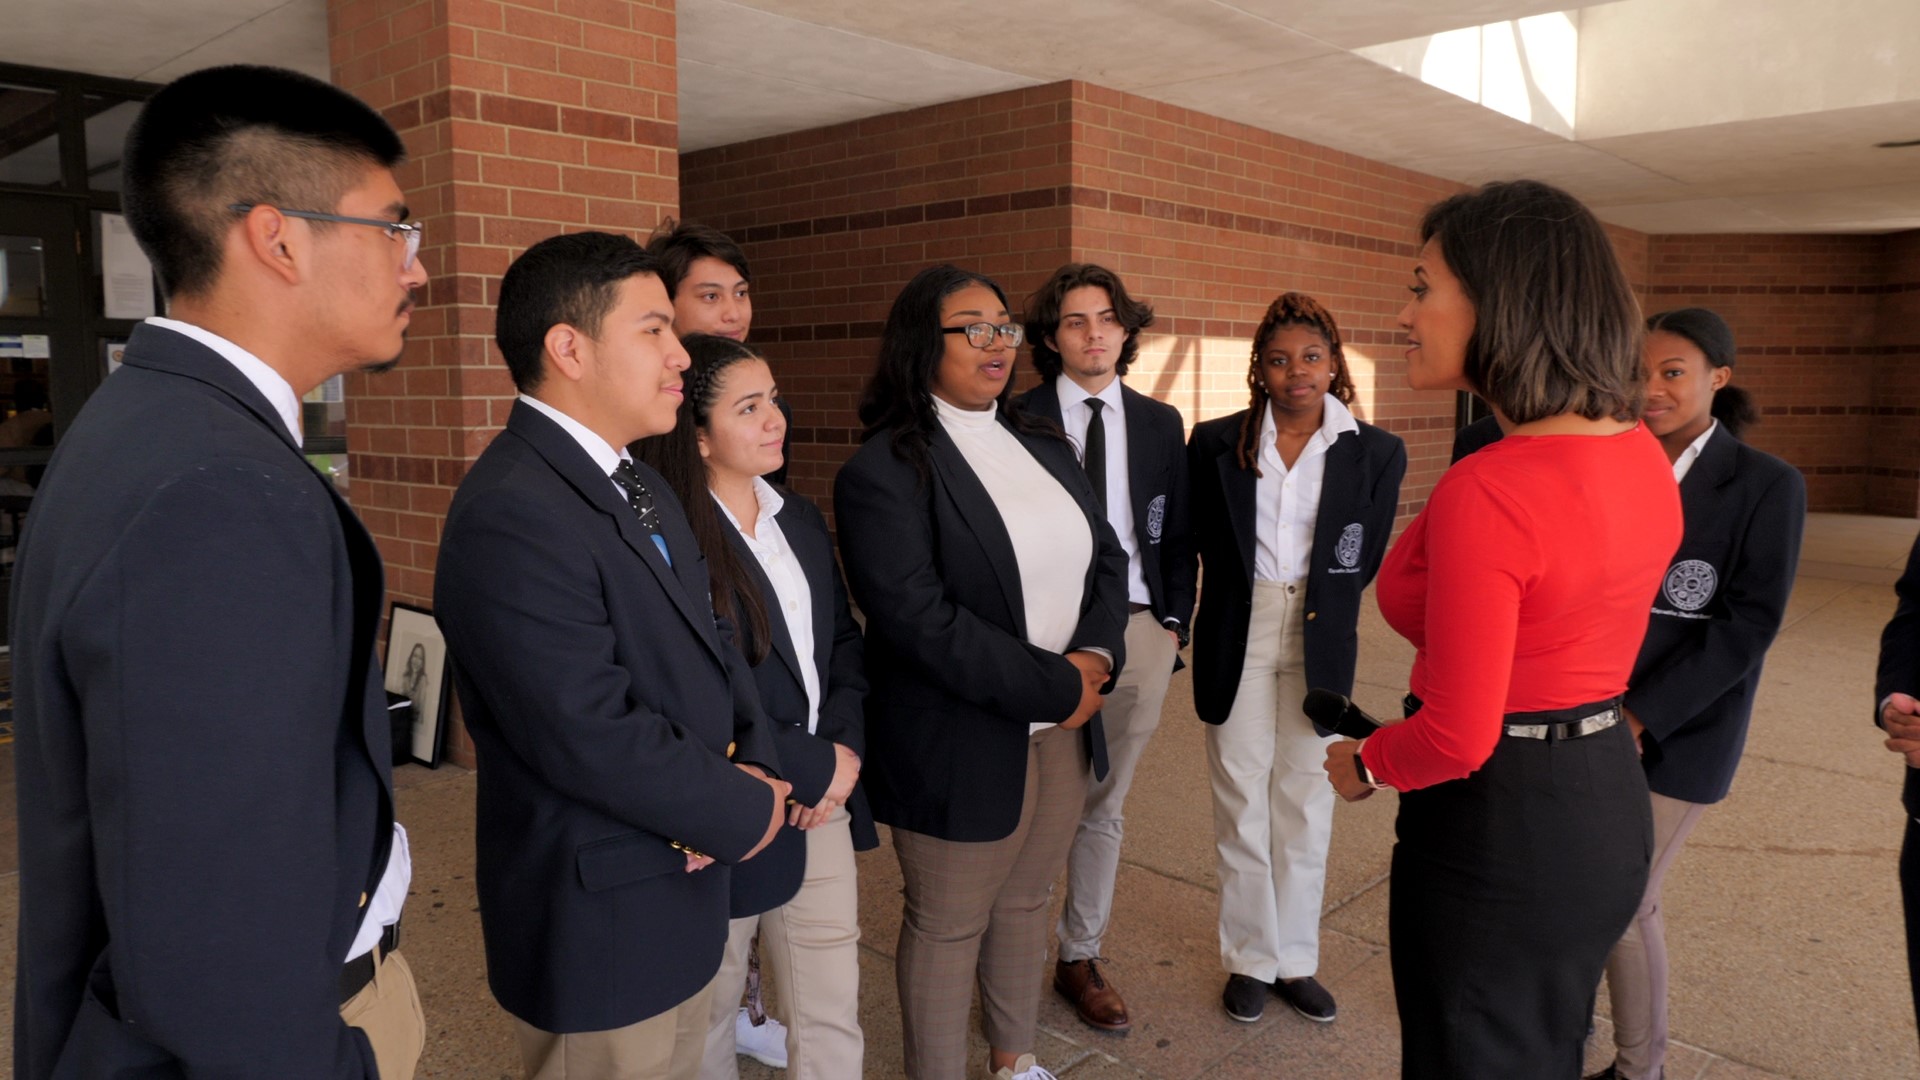 The Principal for a Day Program is meant to help people who don't work in education understand the strengths and challenges Dallas ISD schools face.